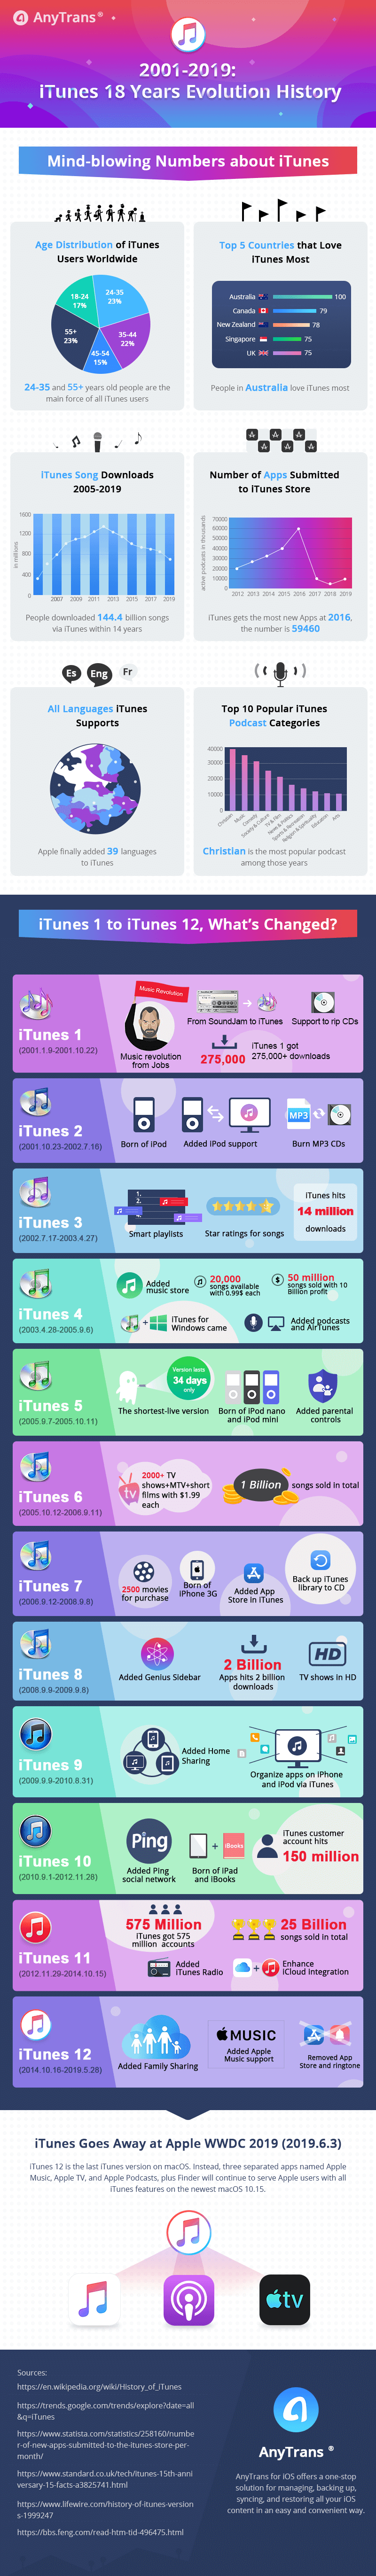 iTunes 18 Years Evolution History #infographic